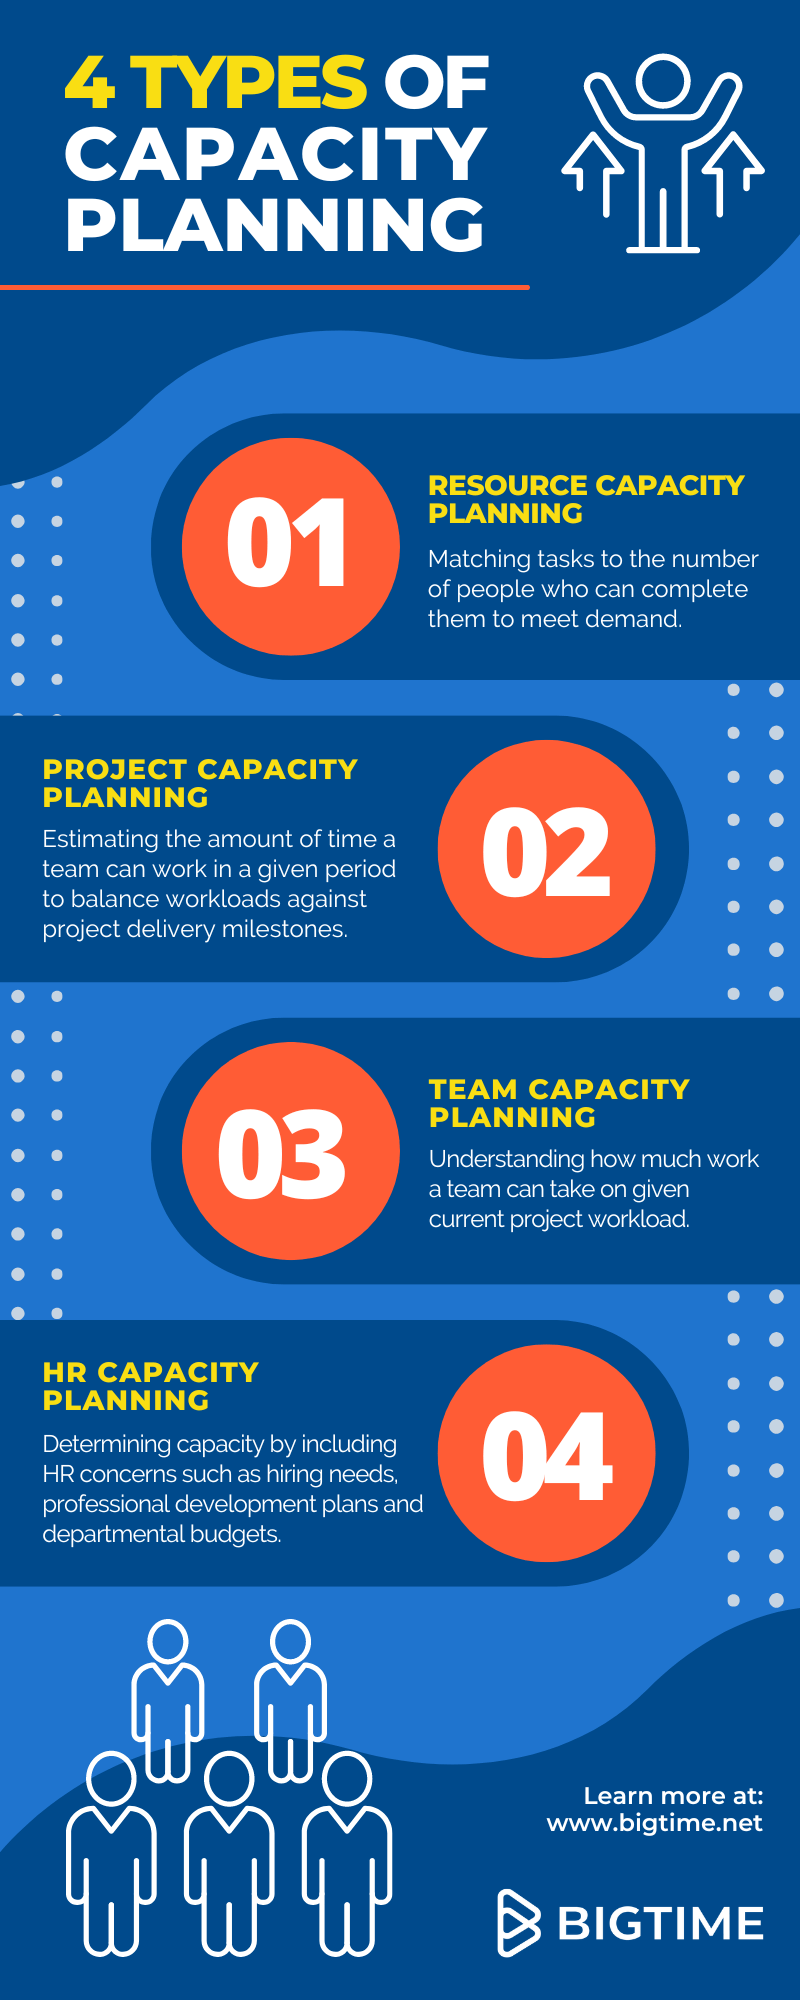 4 types of capacity planning infographic